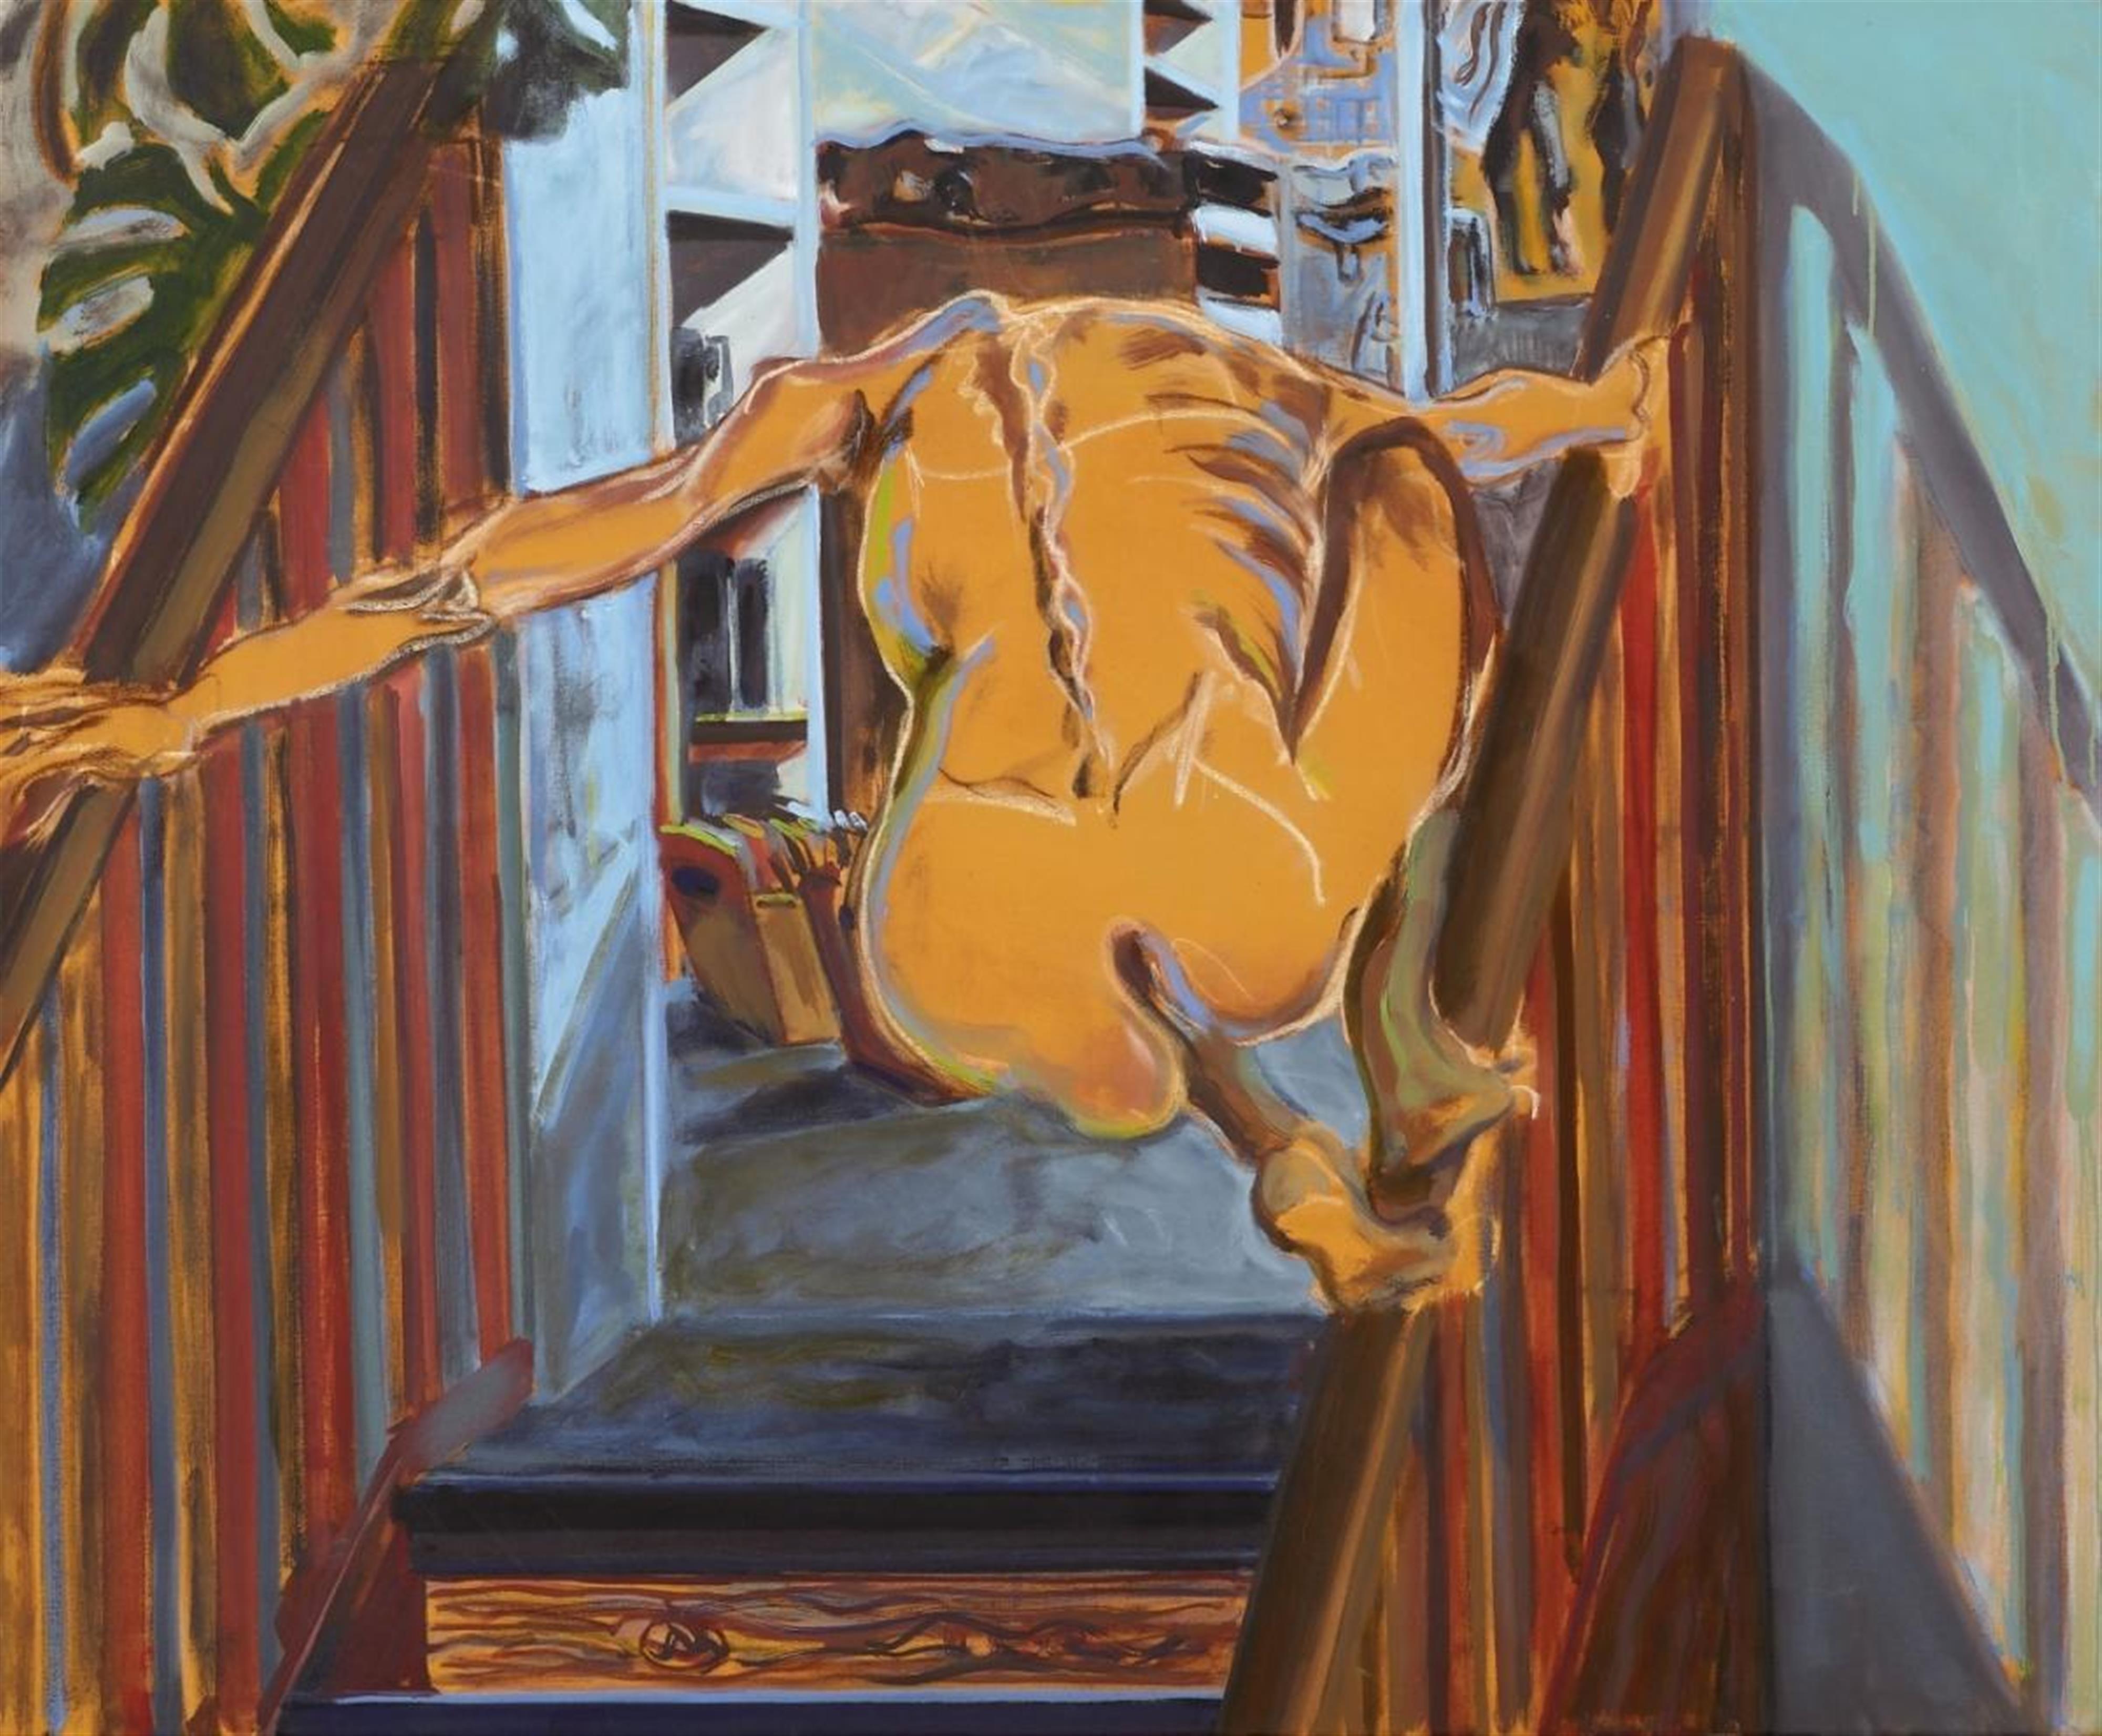 Norbert Tadeusz - Treppe rauf (up the staircase) - image-1